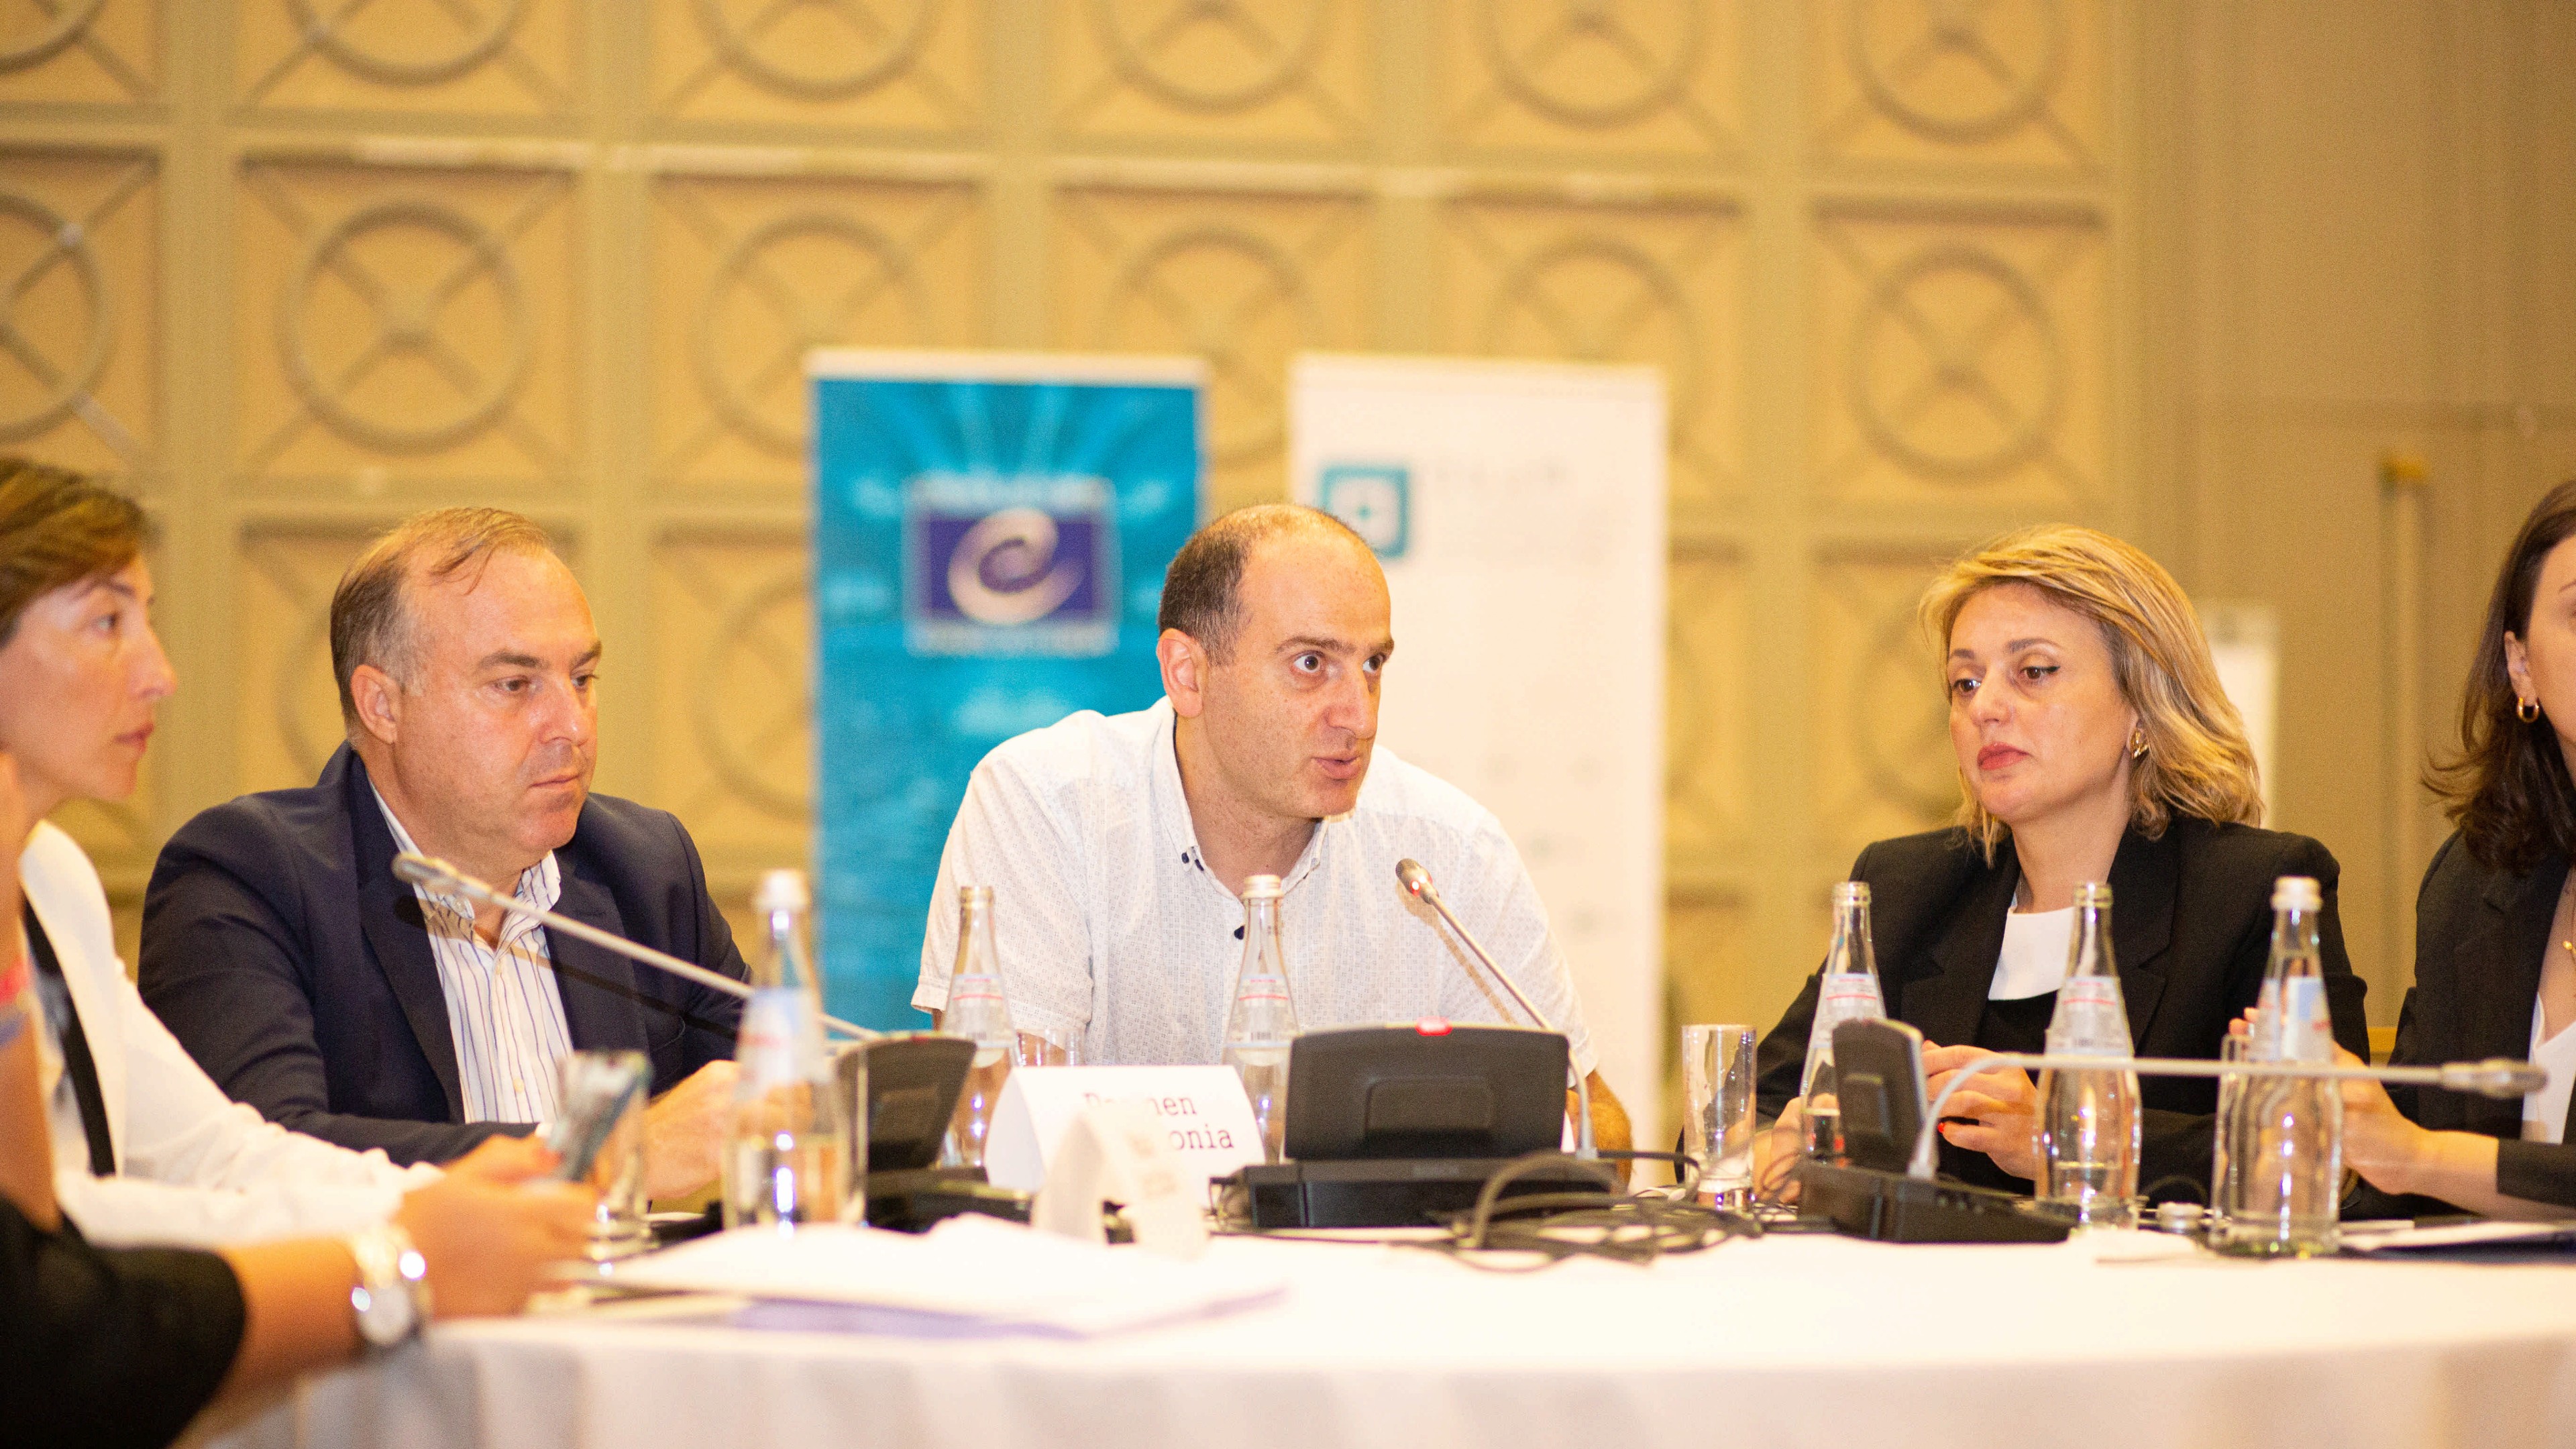 Regional media representatives discussed media development and coverage of elections ahead of 2024 Parliamentary Elections